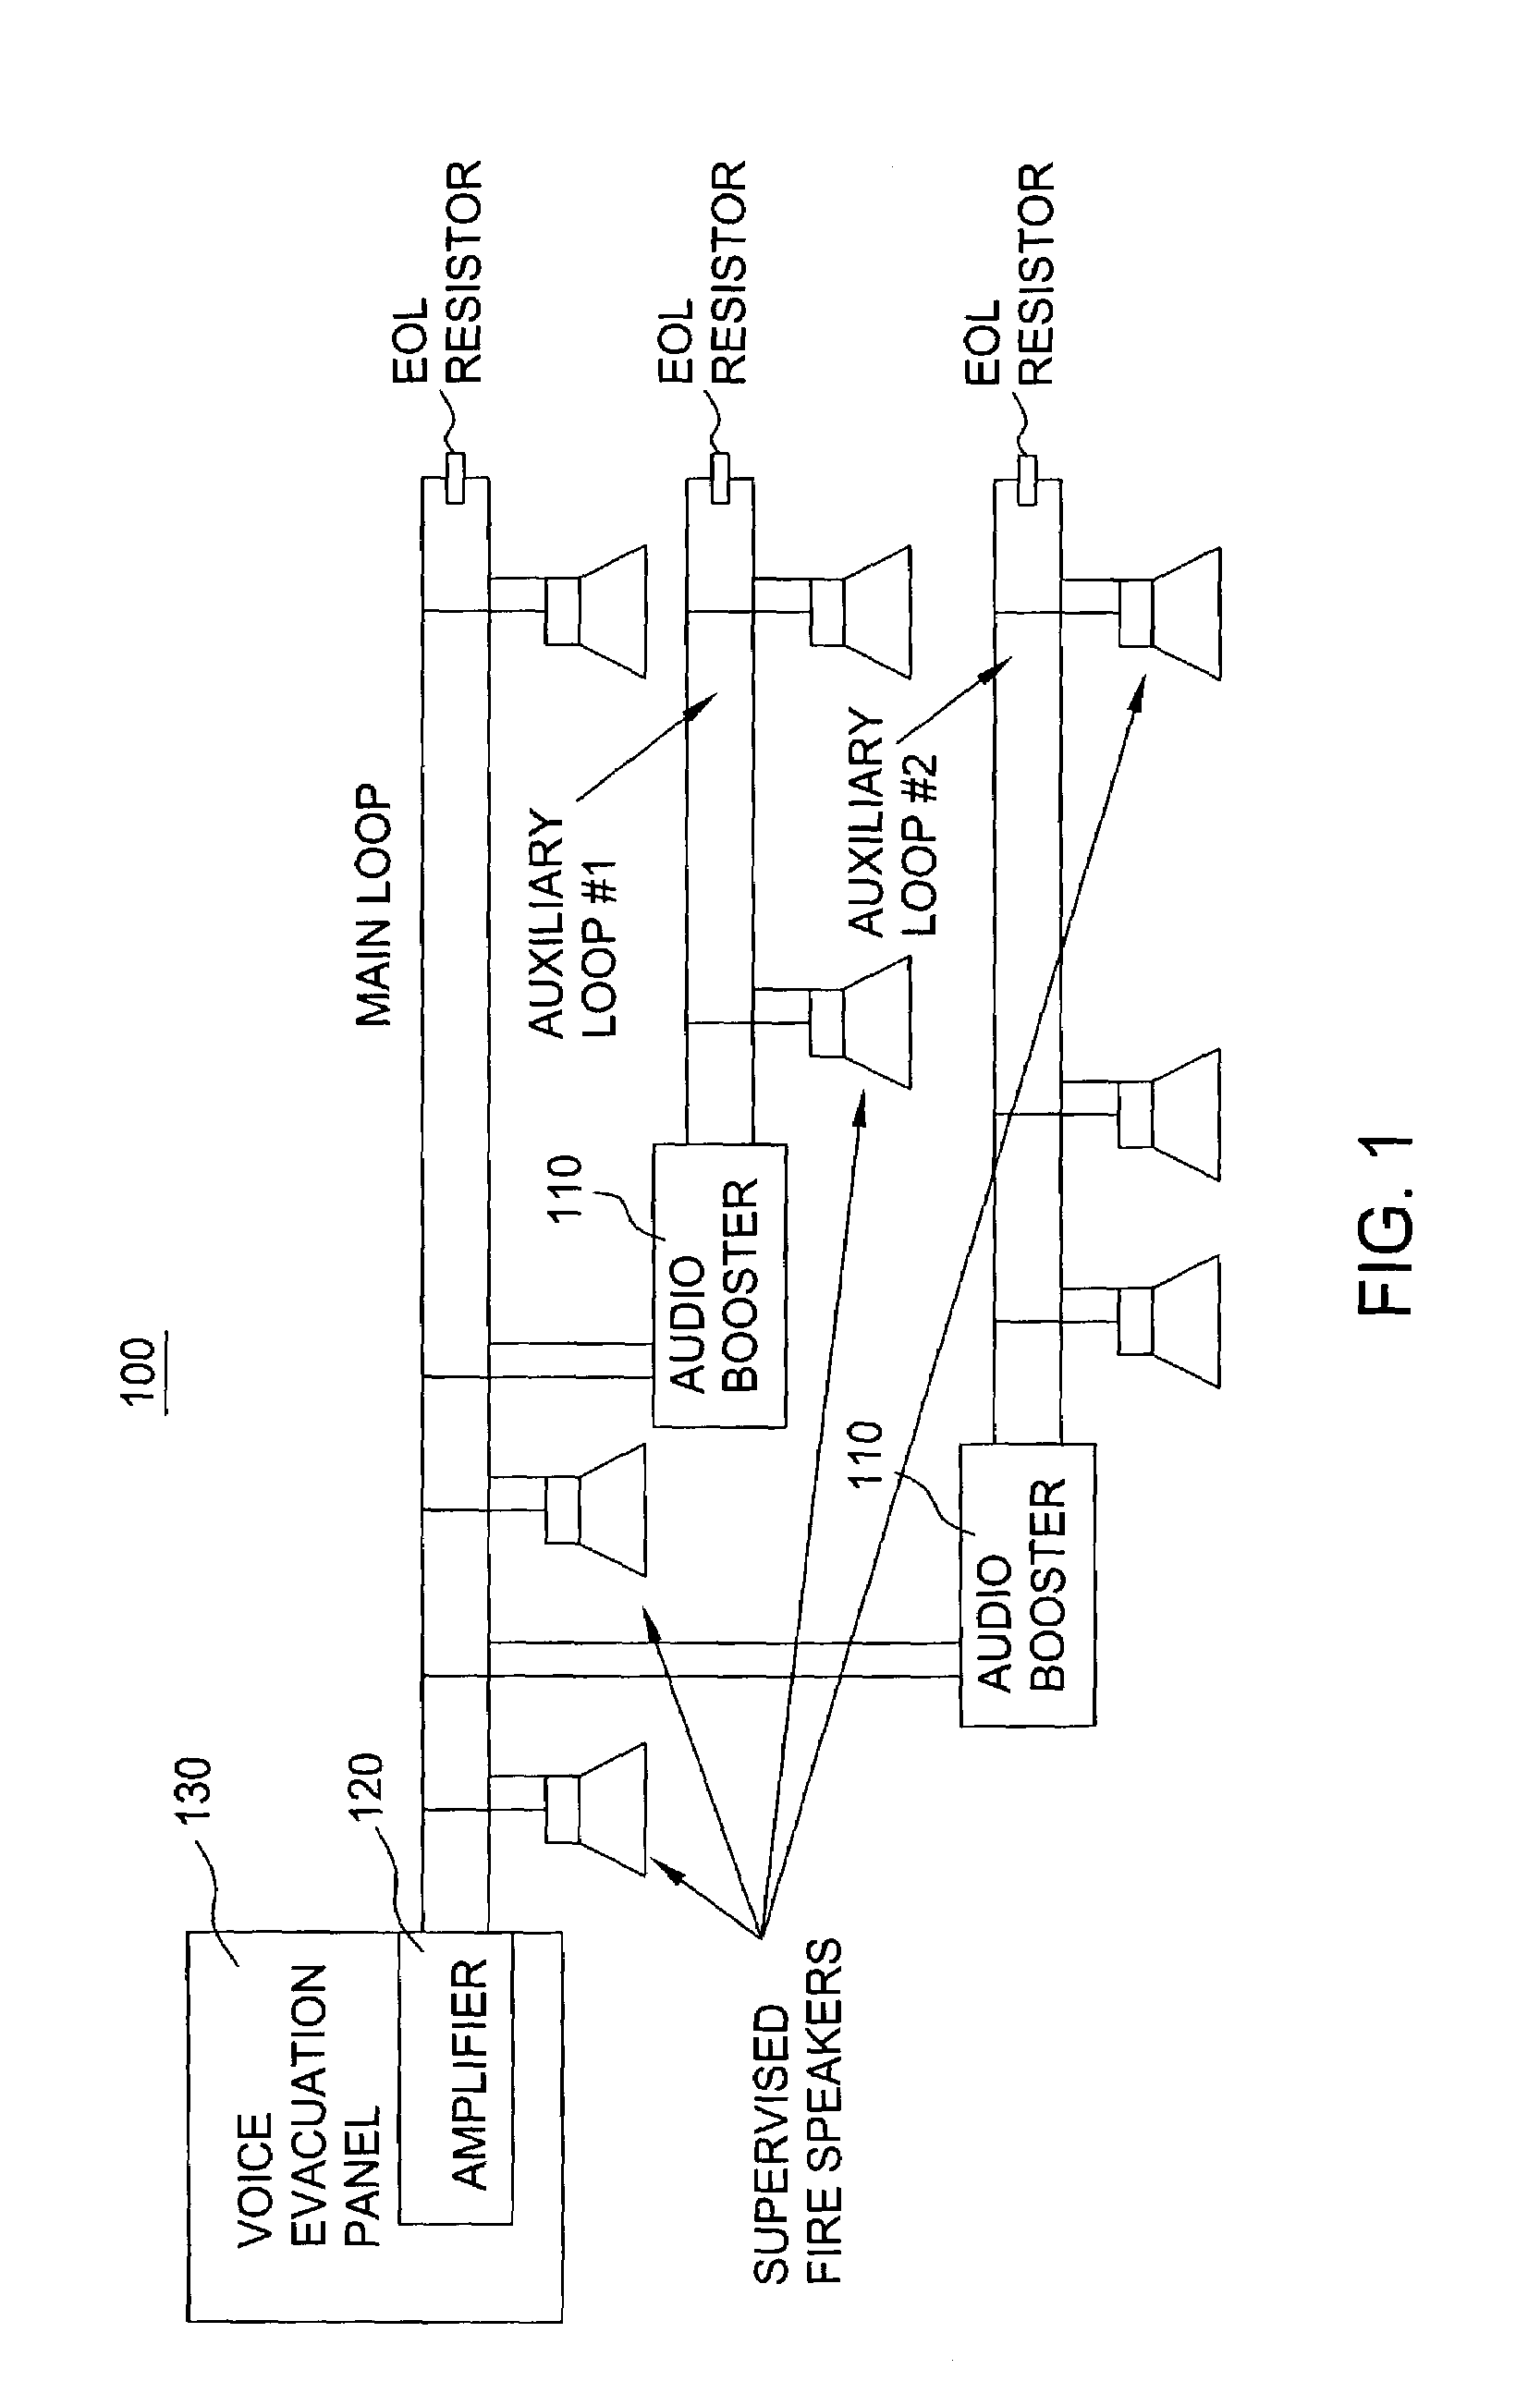 Method and apparatus for boosting an audible signal in a notification system